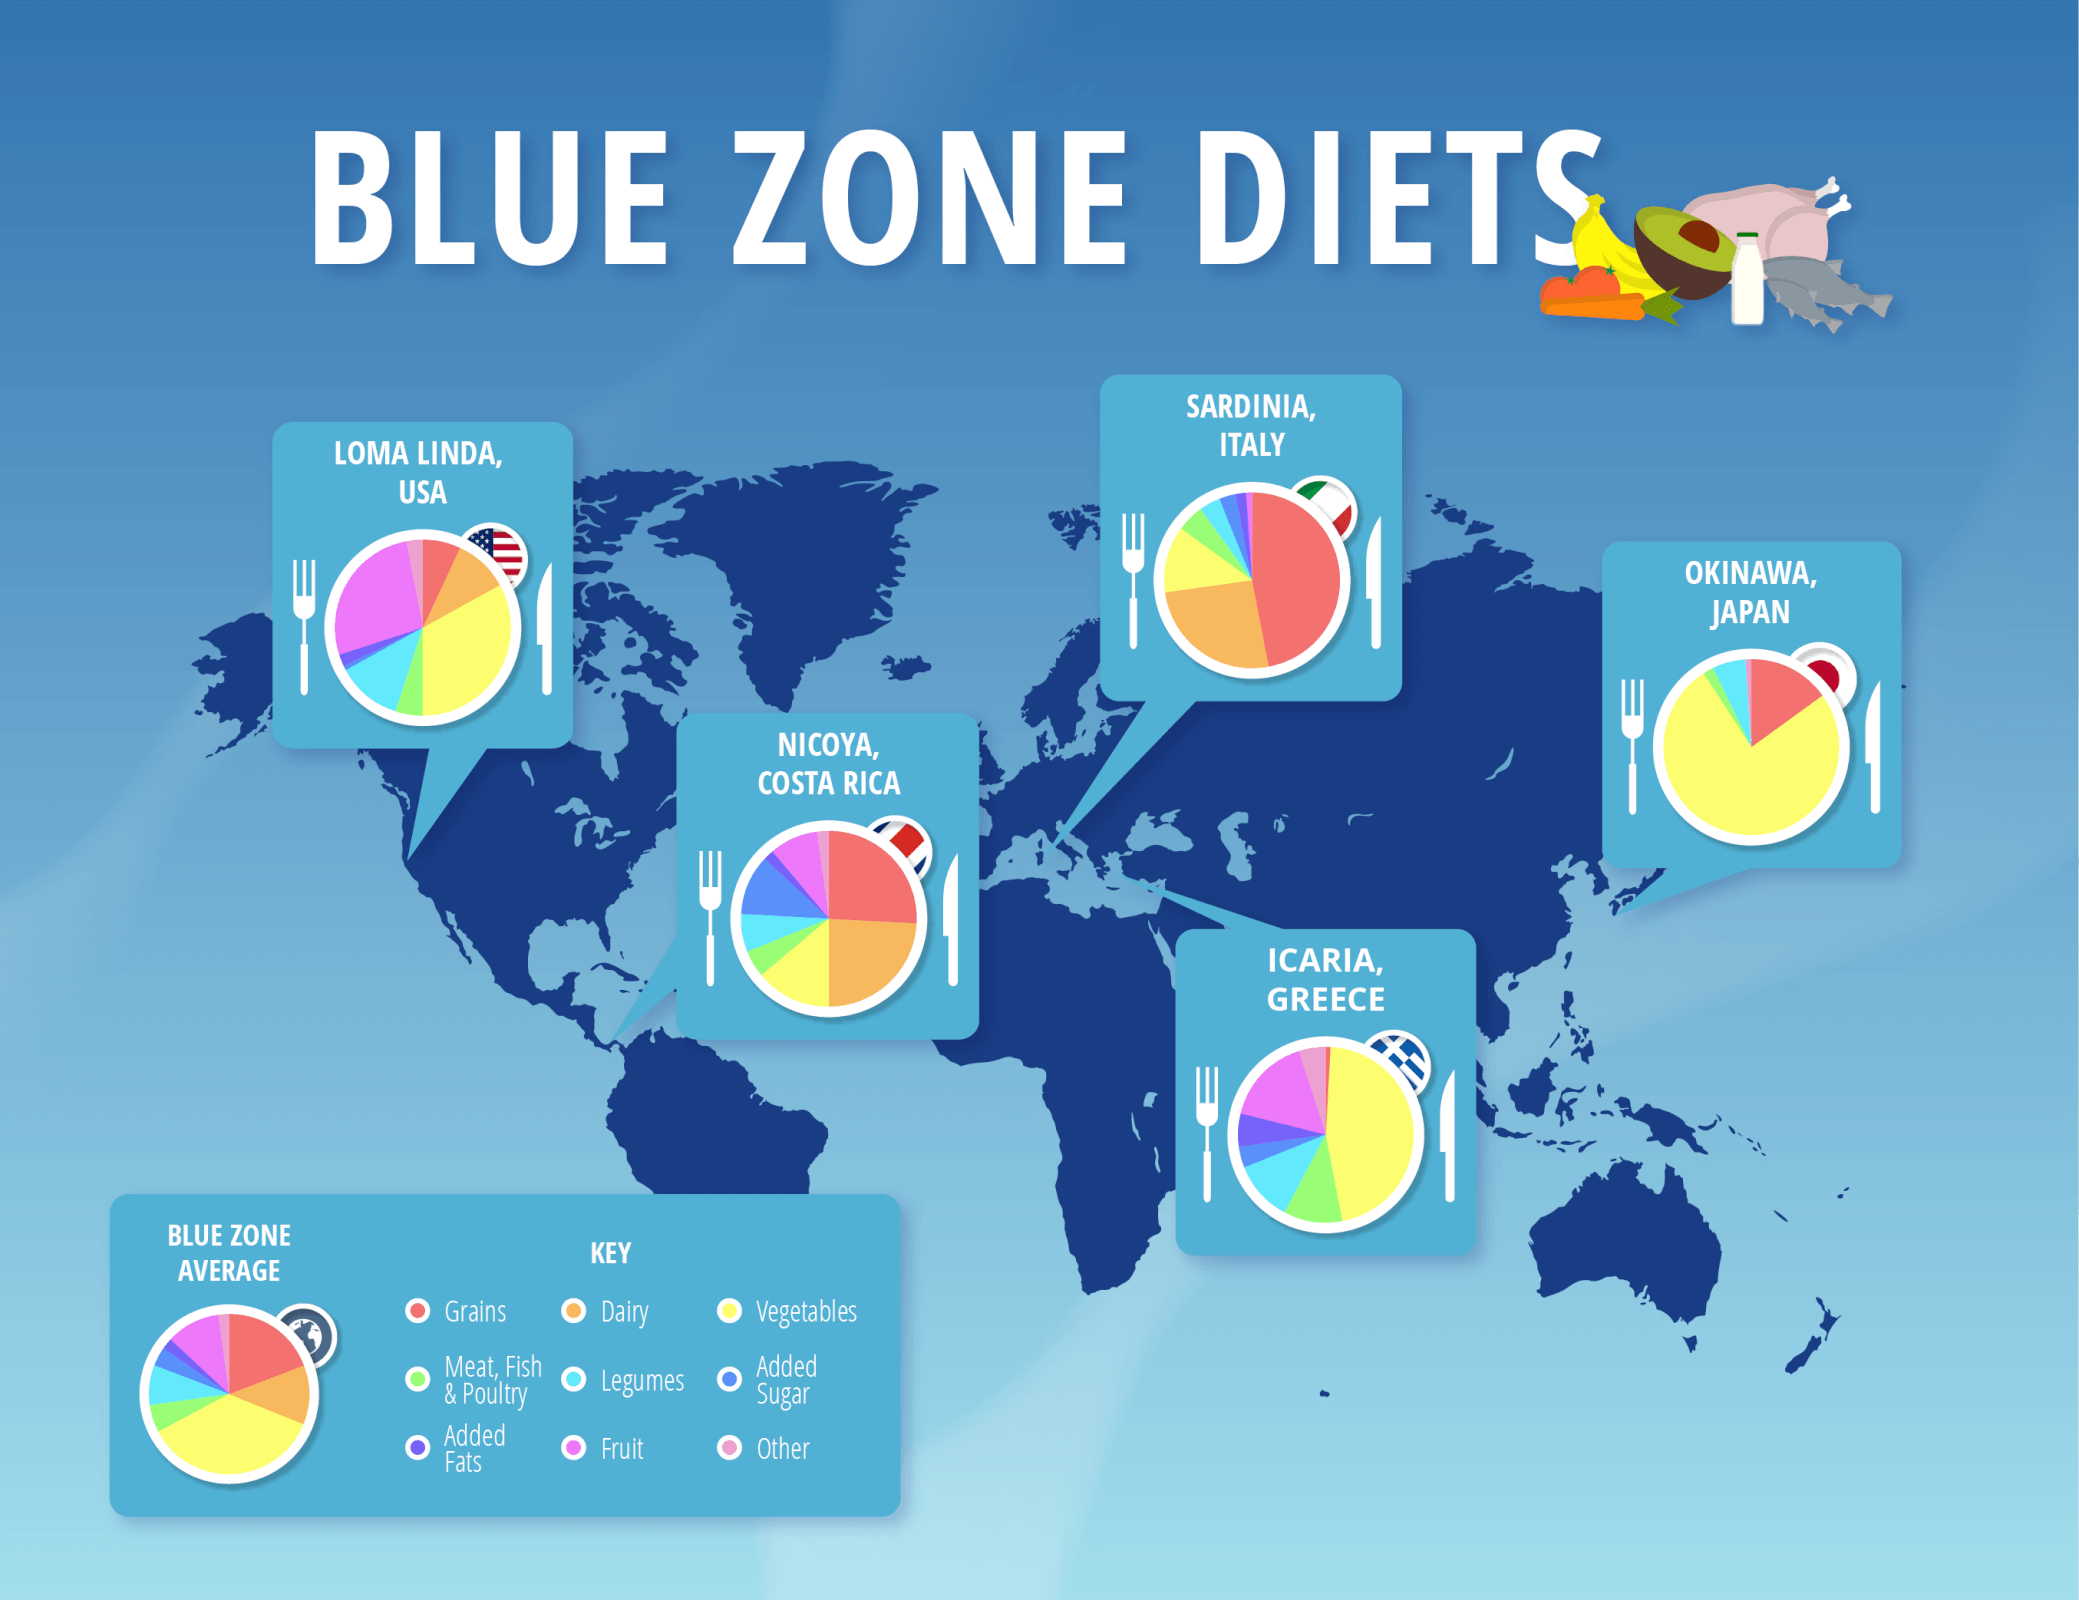 Which Country Offers The Healthiest Food Choices?